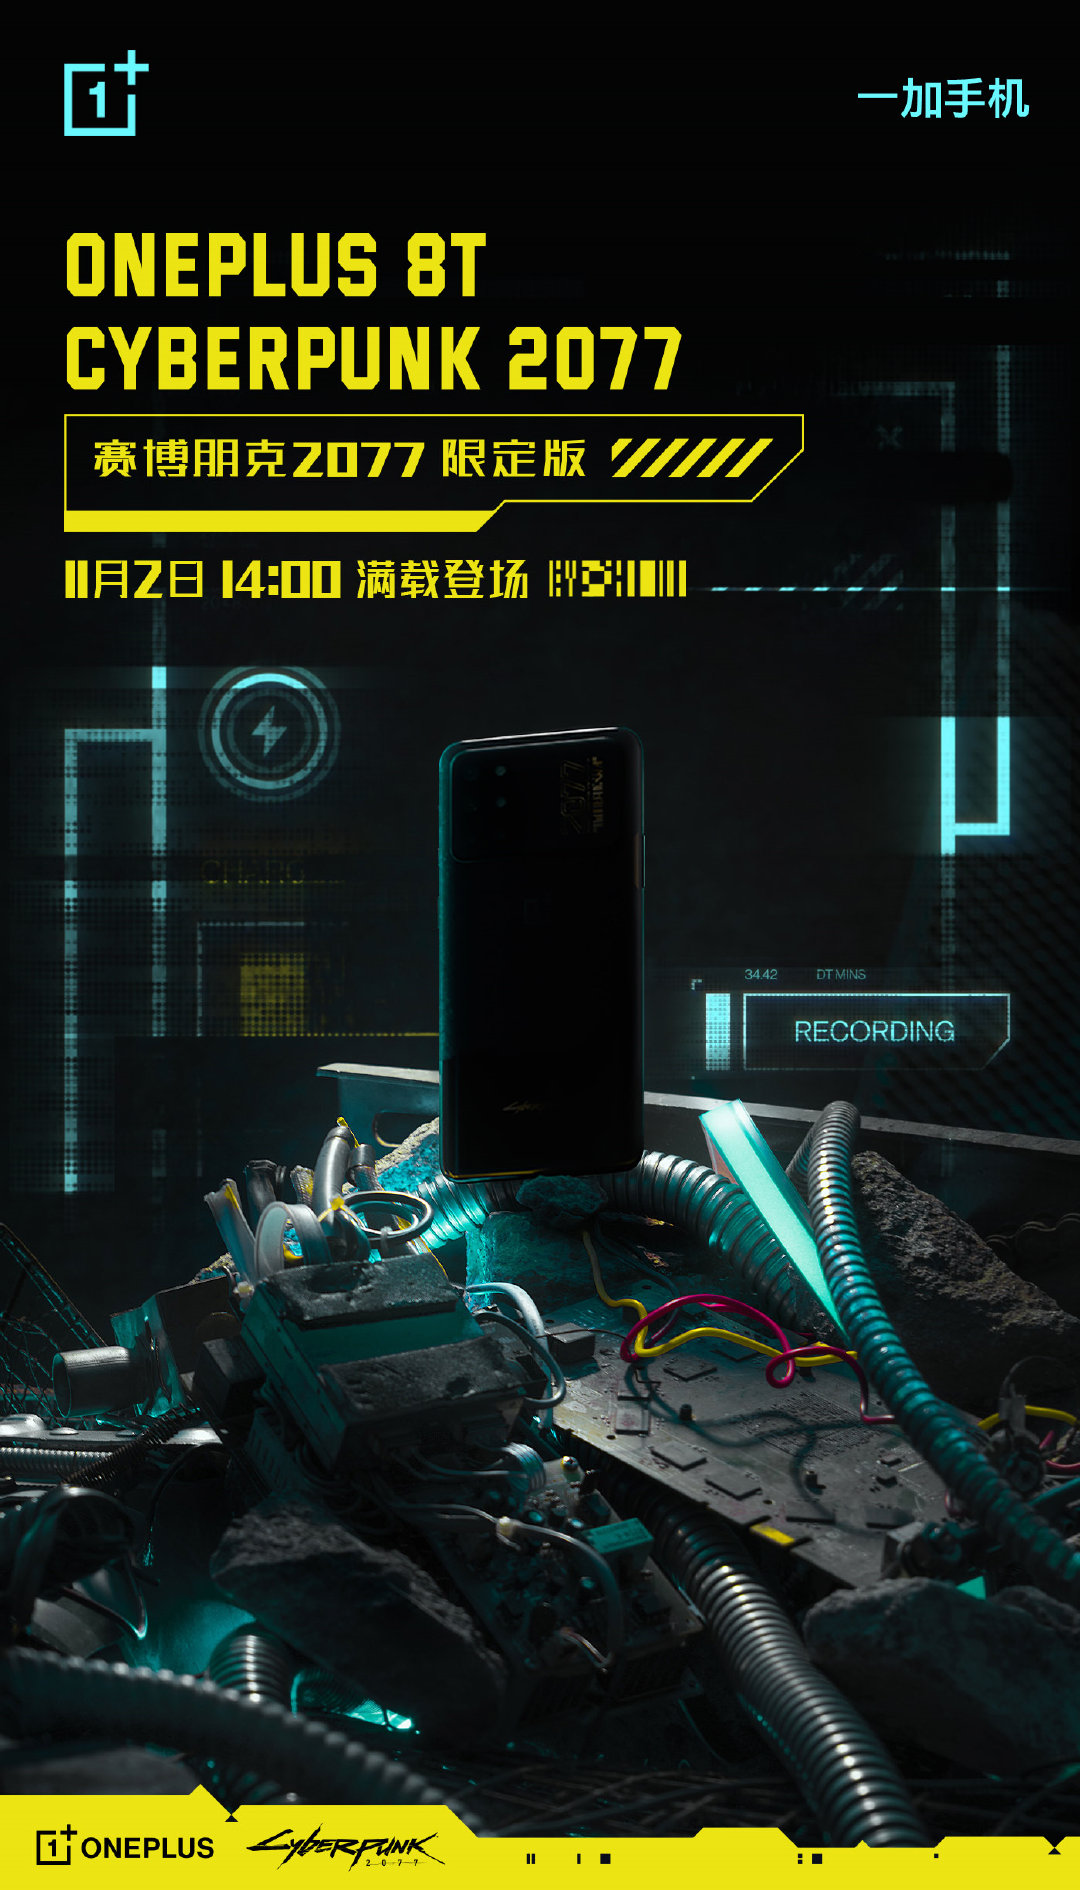 OnePlus 8T Cyberpunk 2077 Limited Edition launch date